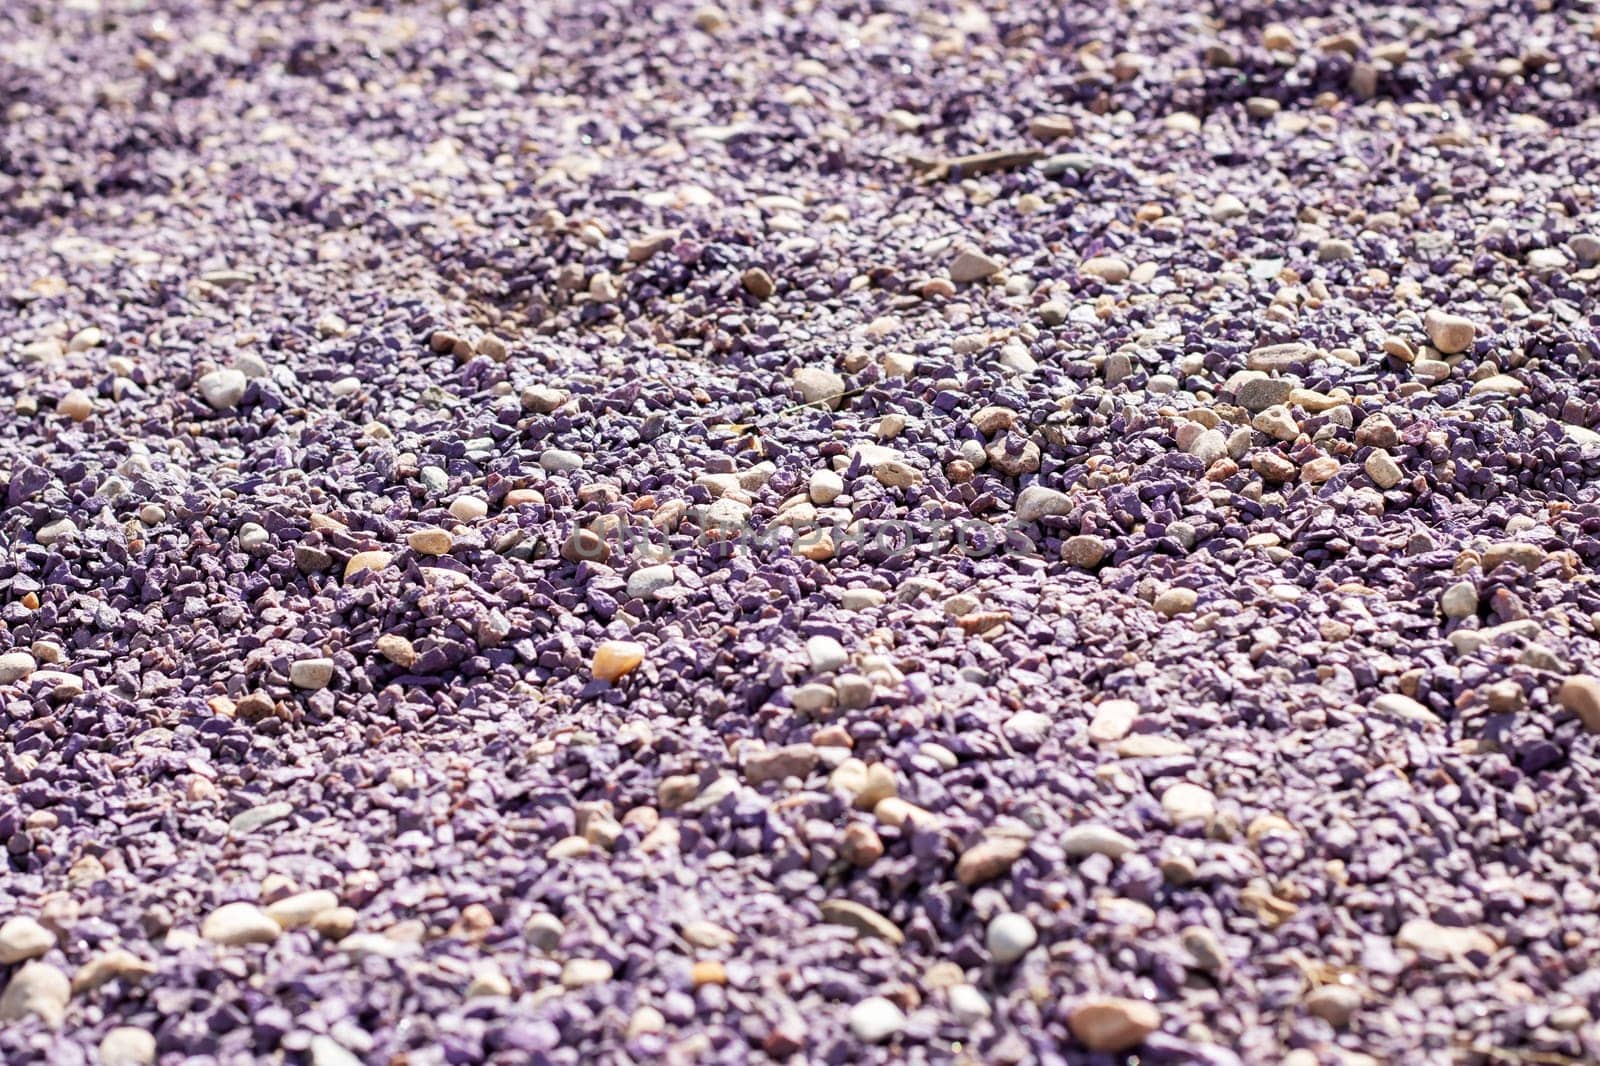 A mixture of purple gravel, rocks, and pebbles is scattered on the ground, blending with the asphalt road surface and soil, creating a unique texture